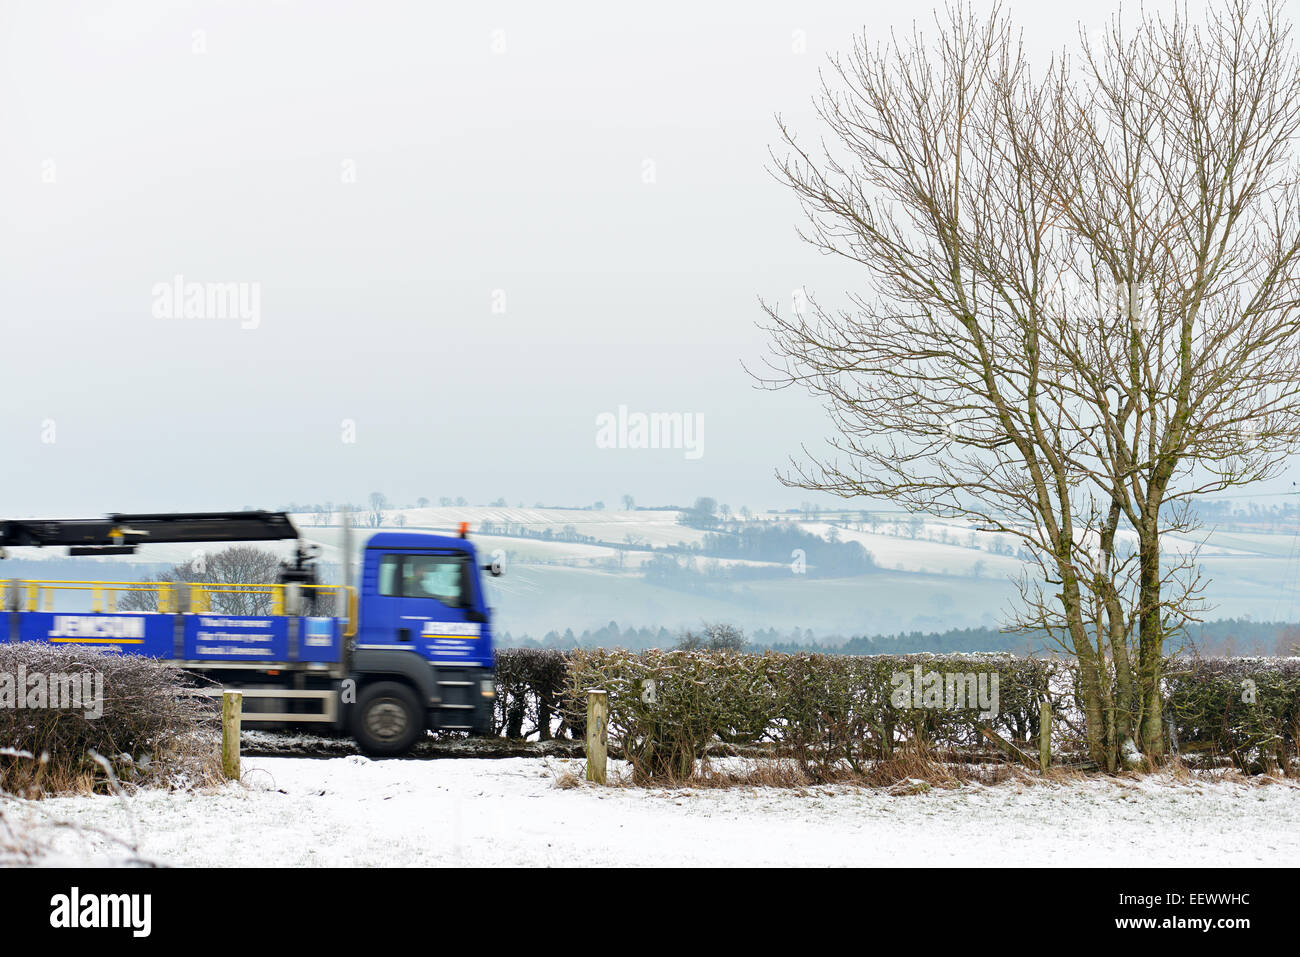 Whashton Green, North Yorkshire, UK. 22nd January, 2015. UK Weather:  A van is driven along a quiet road in North Yorkshire where freezing fog and black ice make driving hazardous. © Robert Smith/Alamy Stock Photo